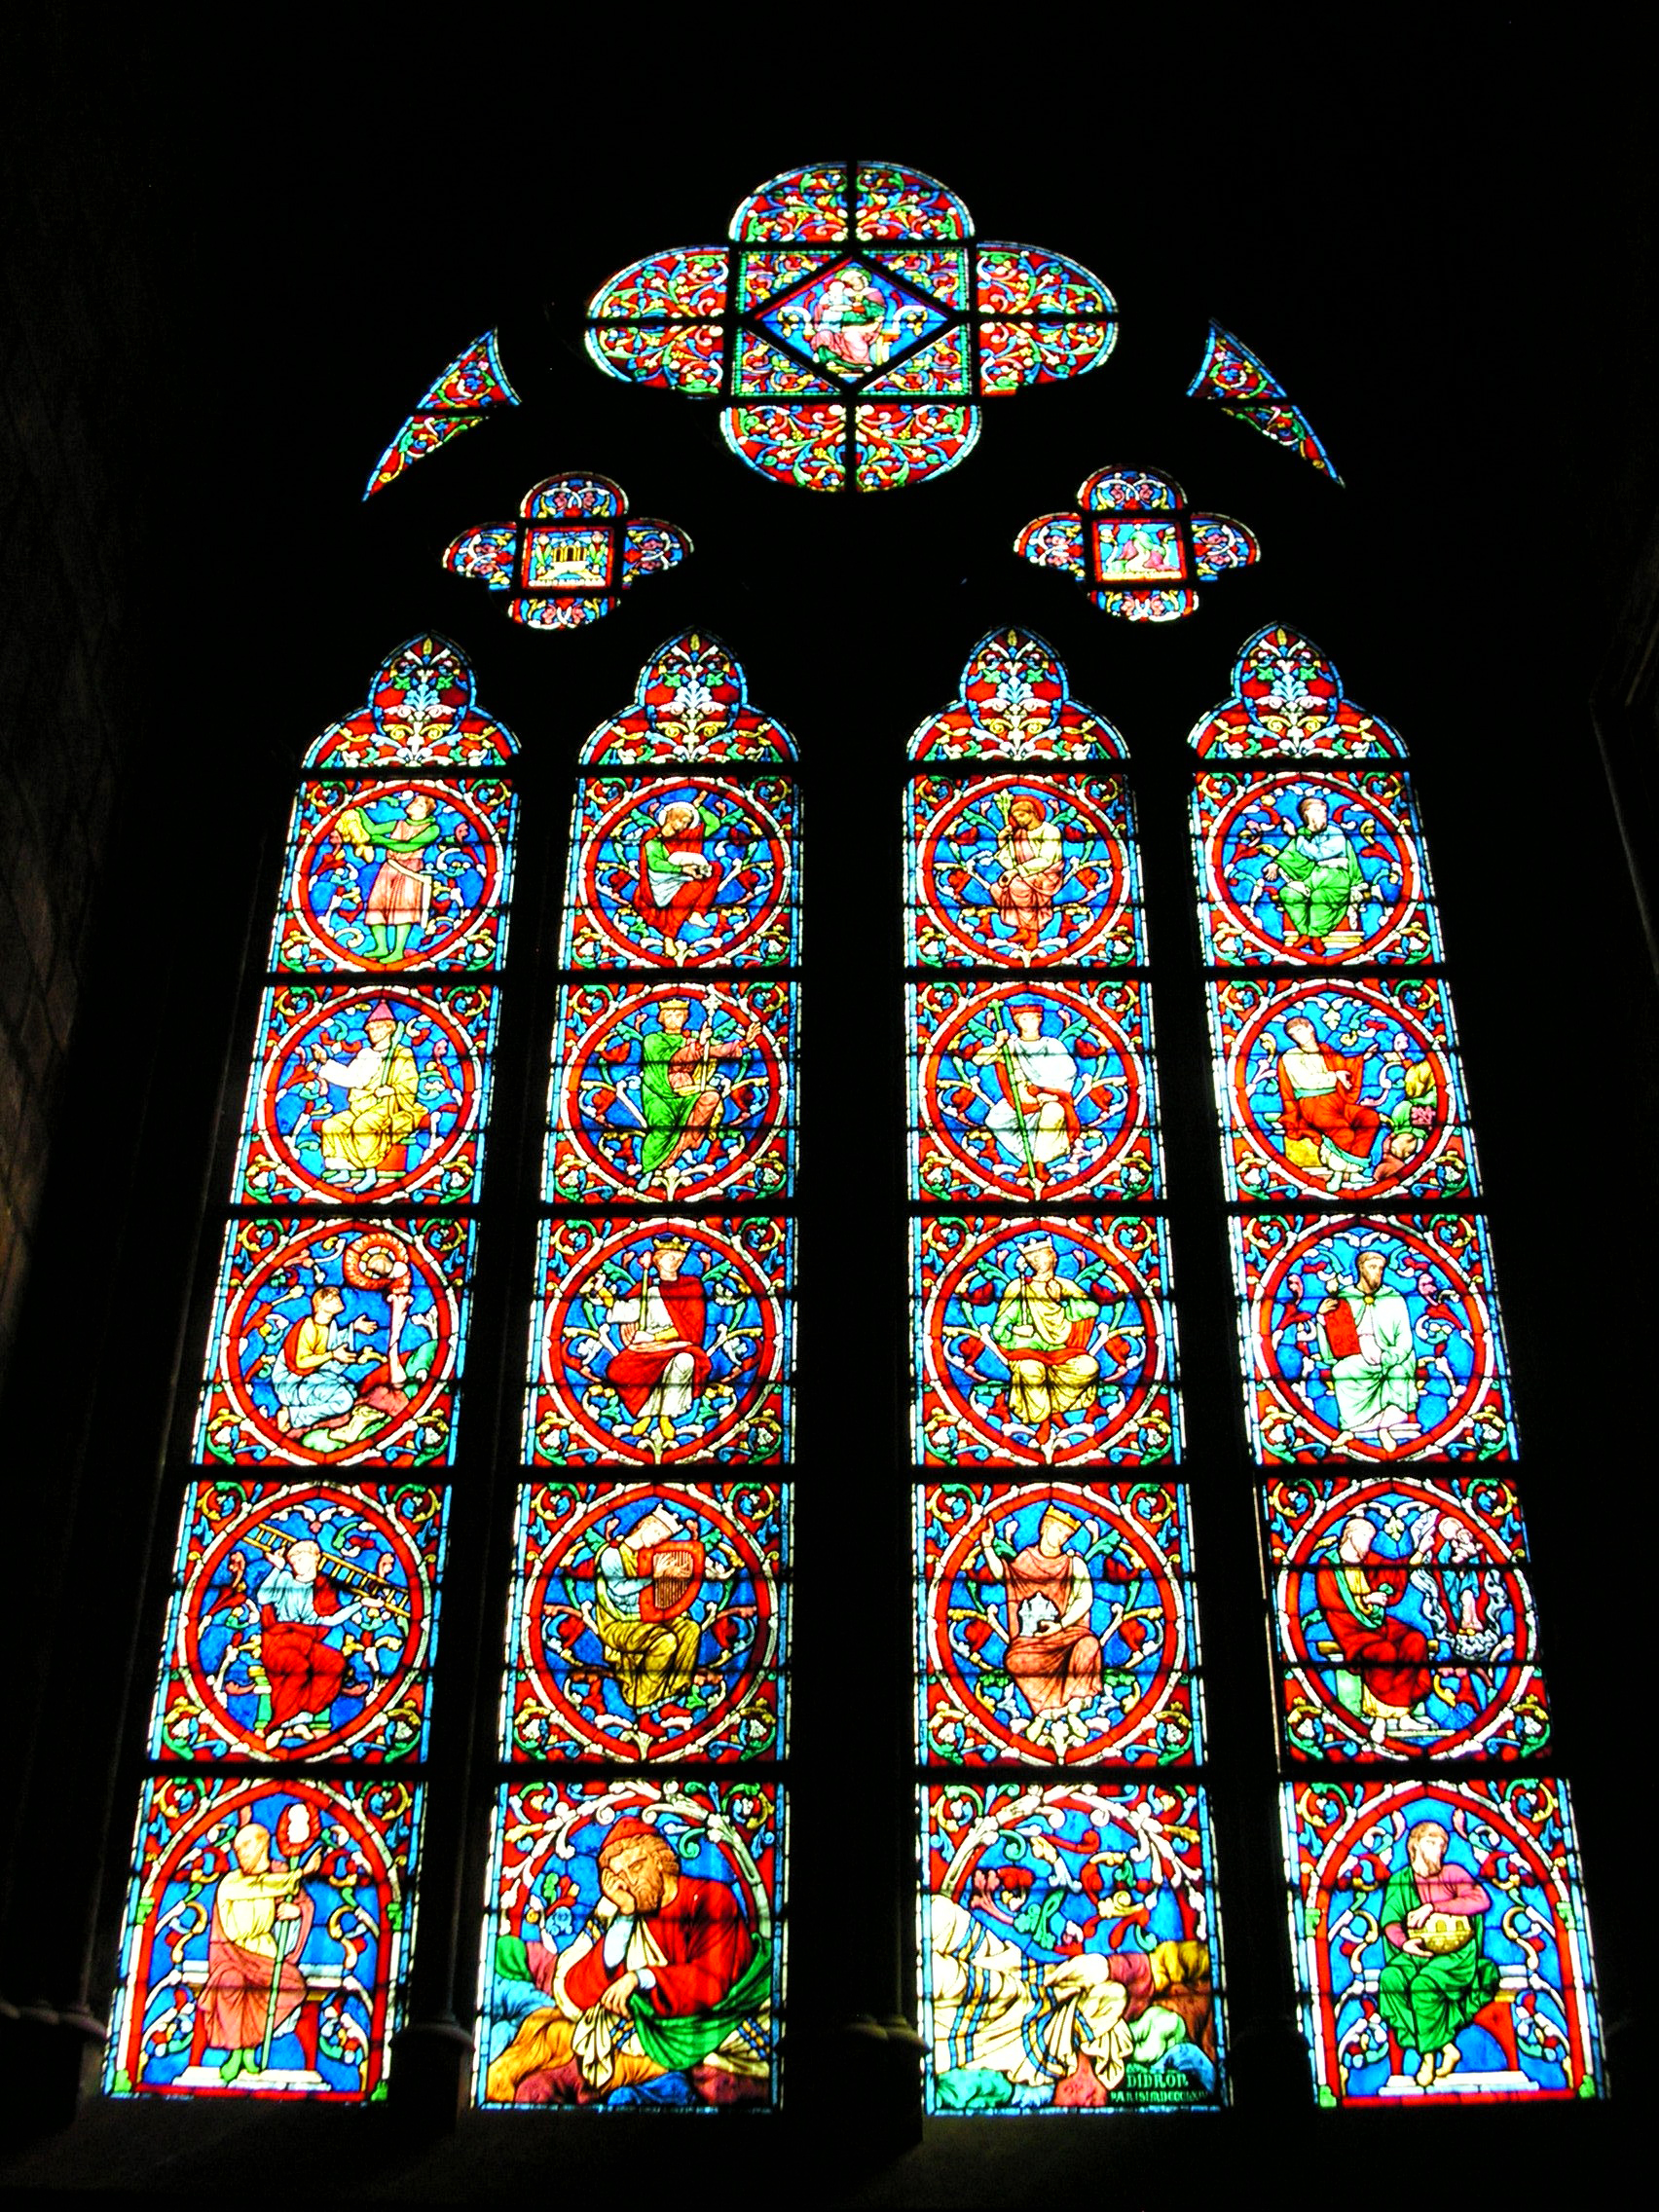 The stained glass window of Notre-Dame...